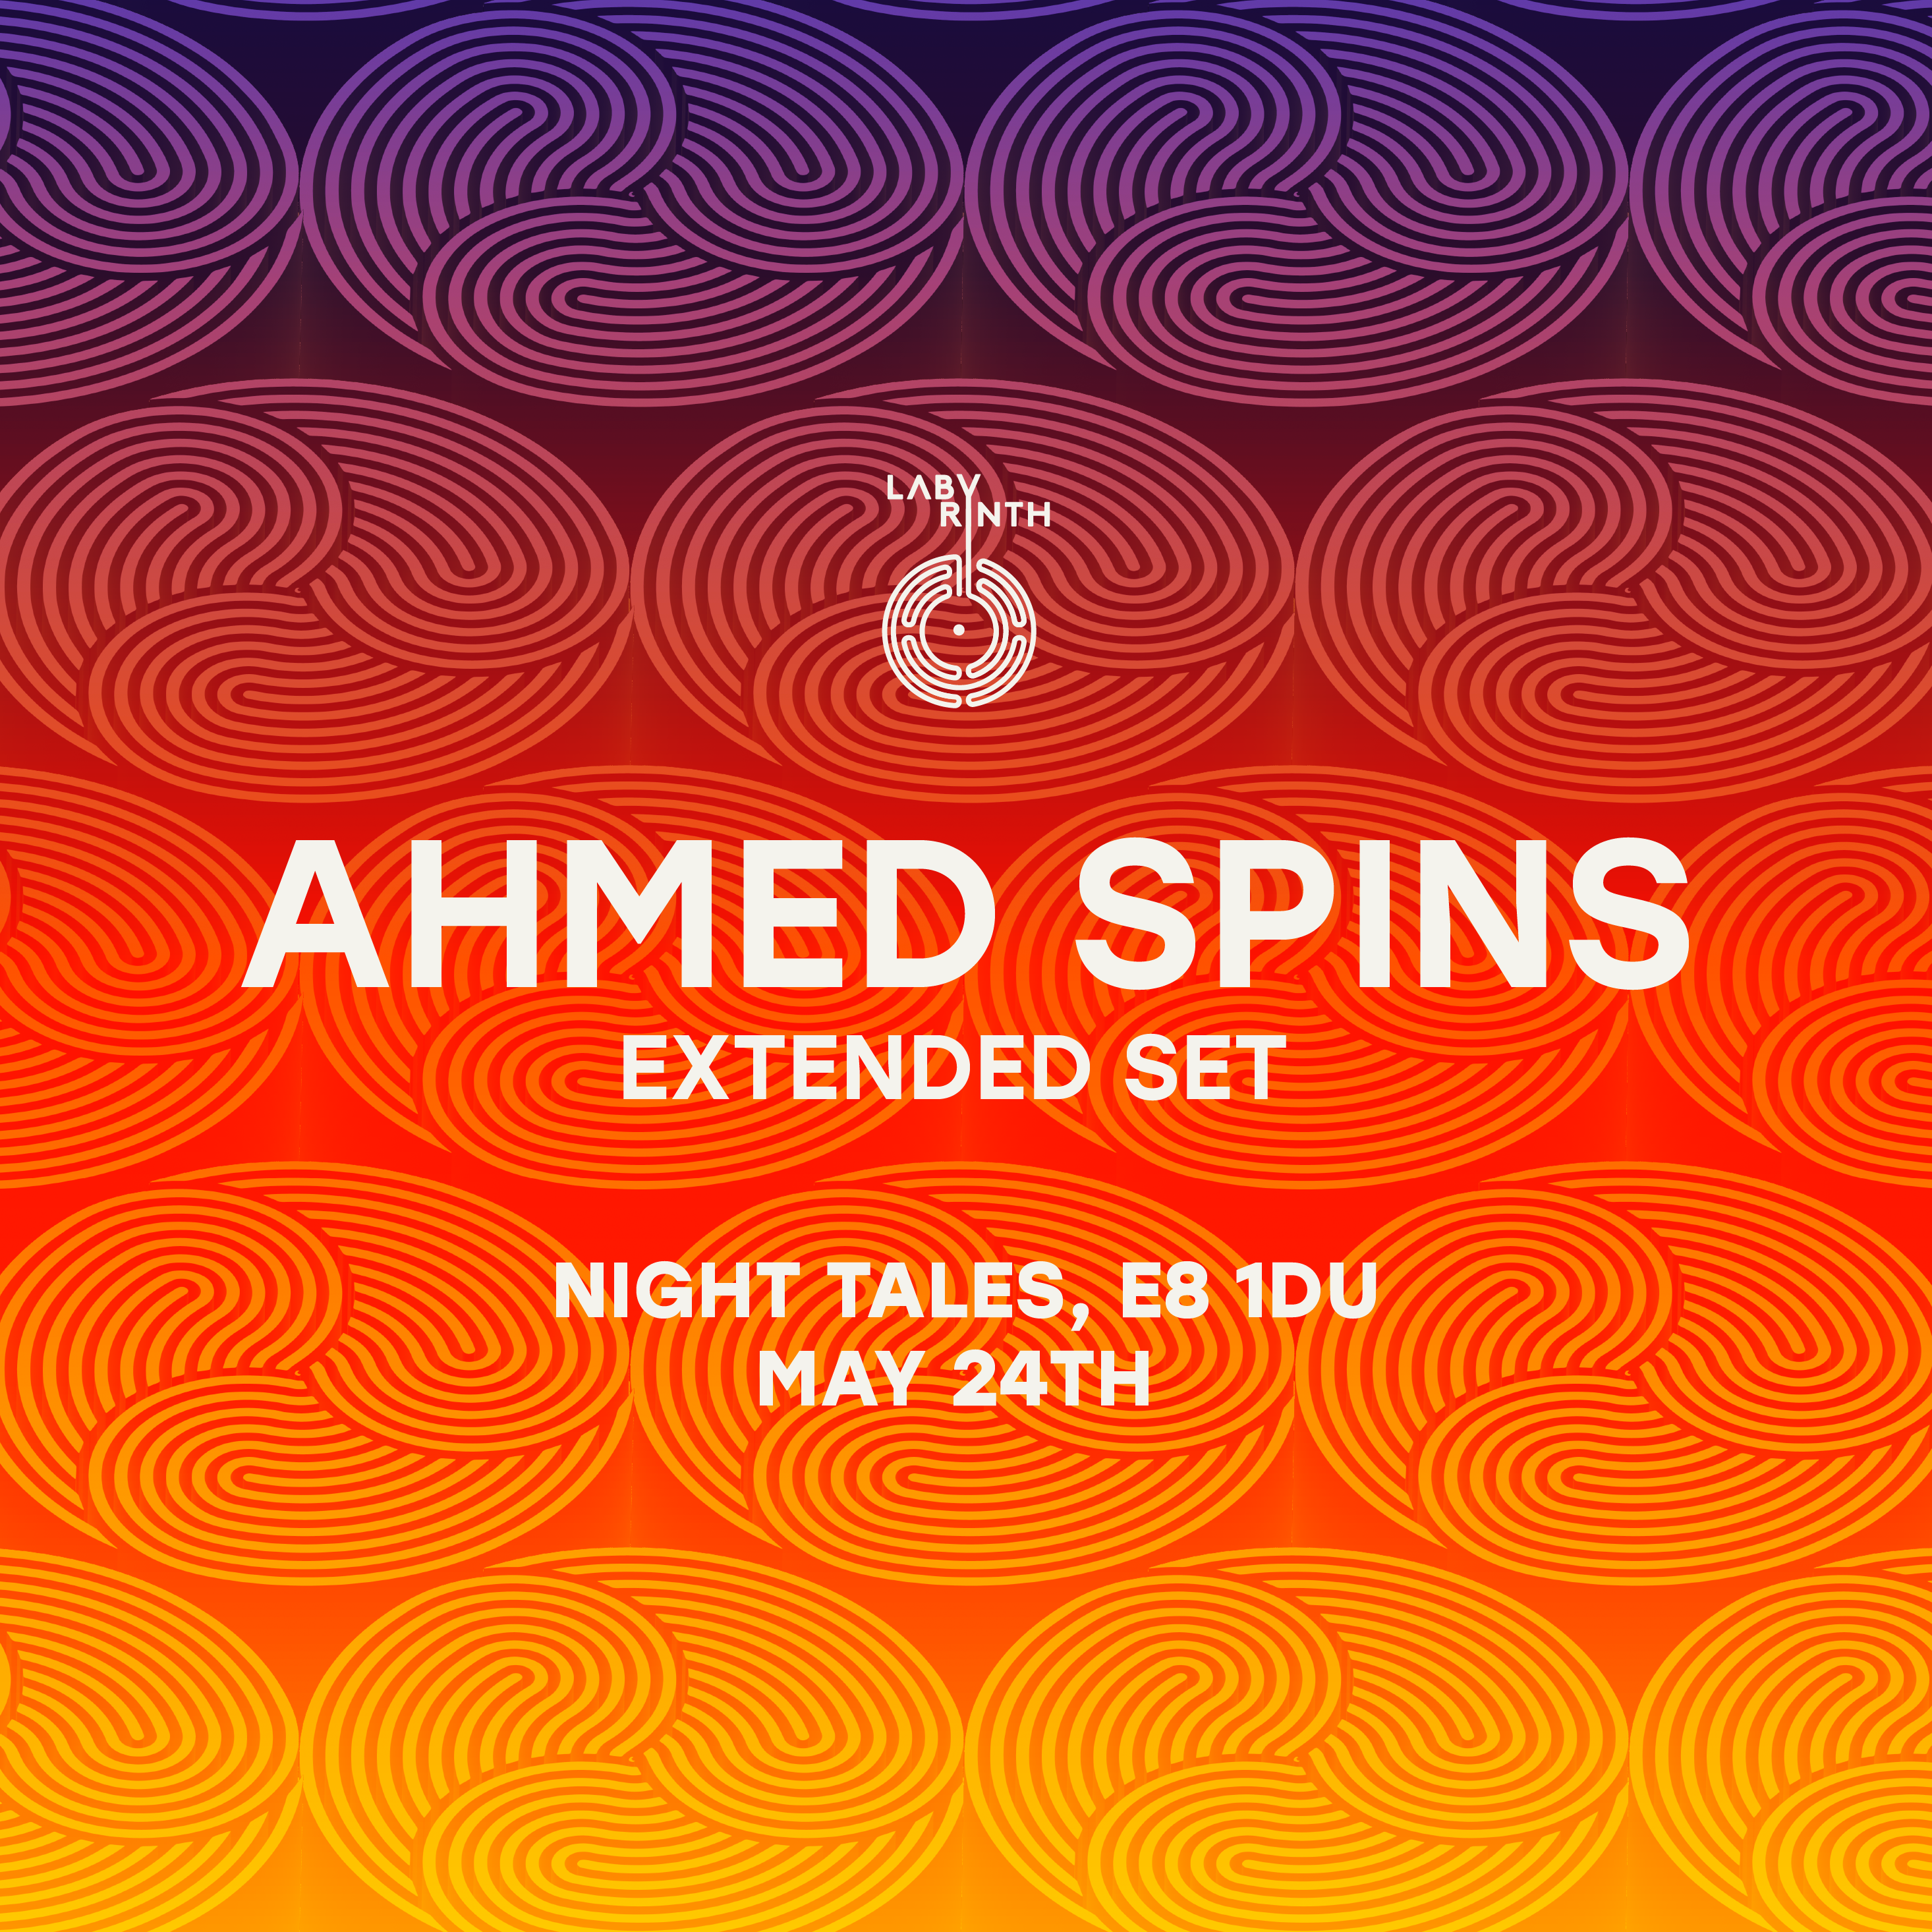 Labyrinth presents: Ahmed Spins extended set - Página frontal